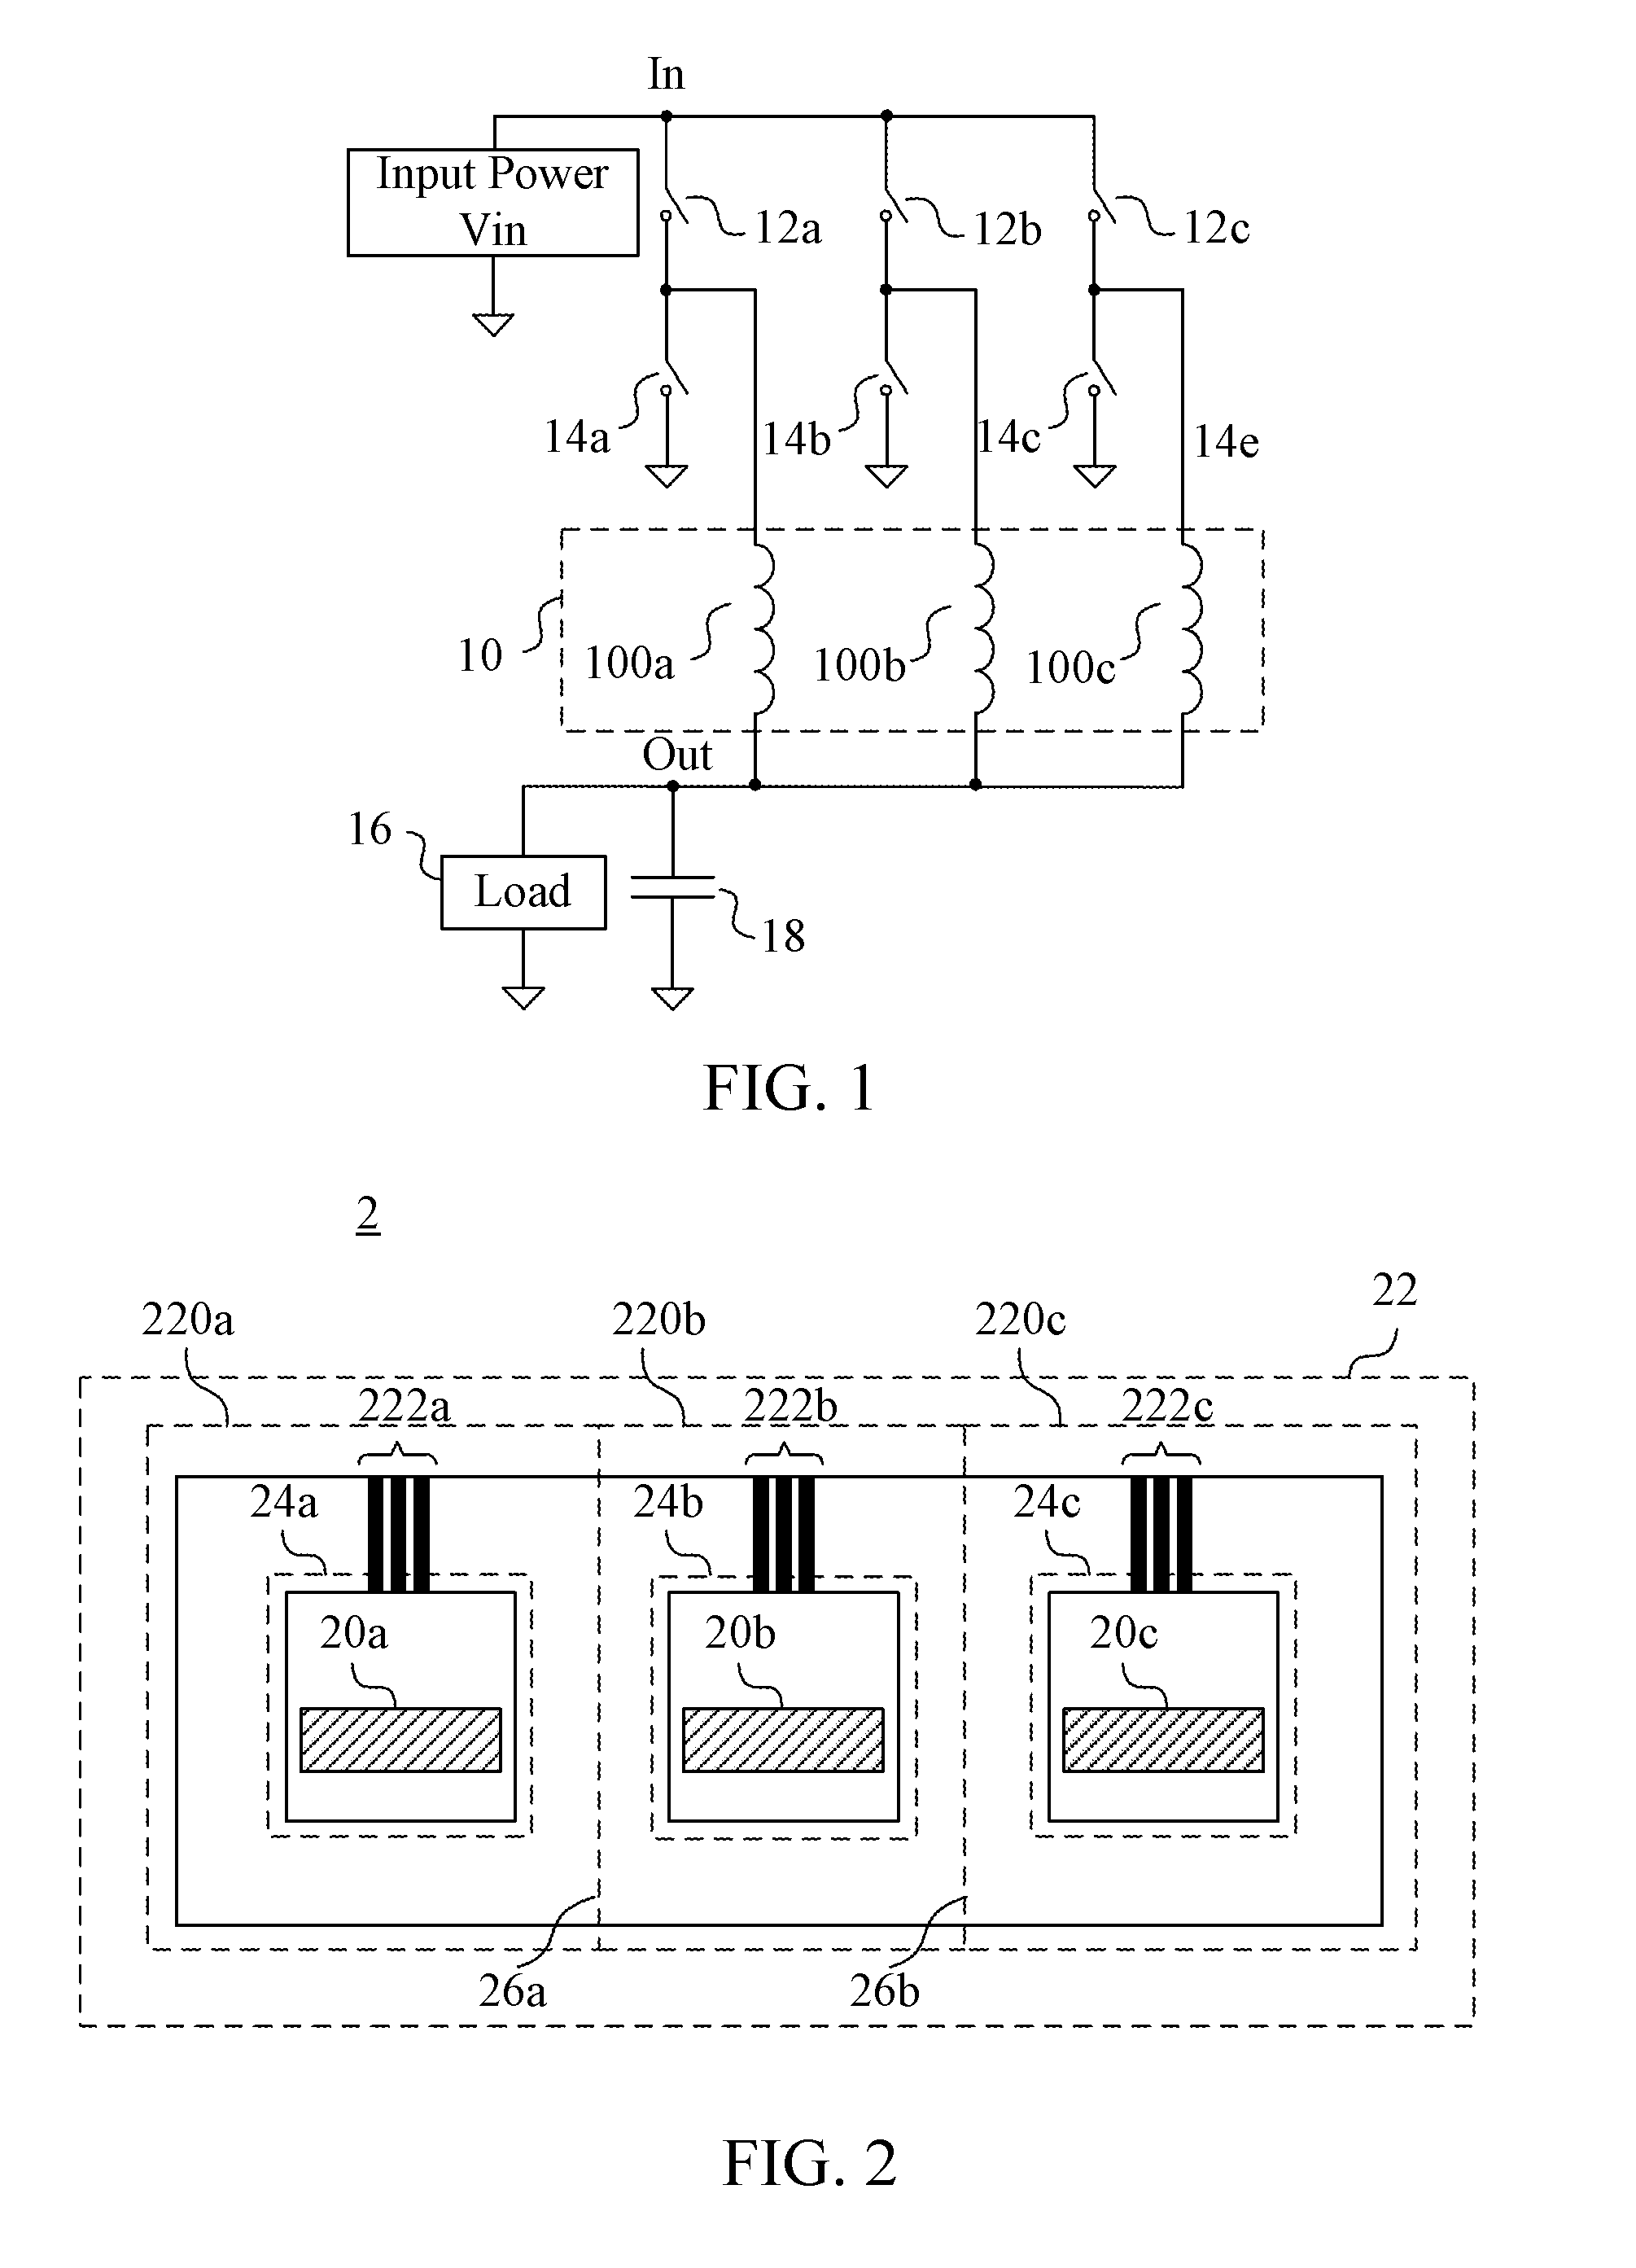 Integrated inductor and integrated inductor magnetic core of the same